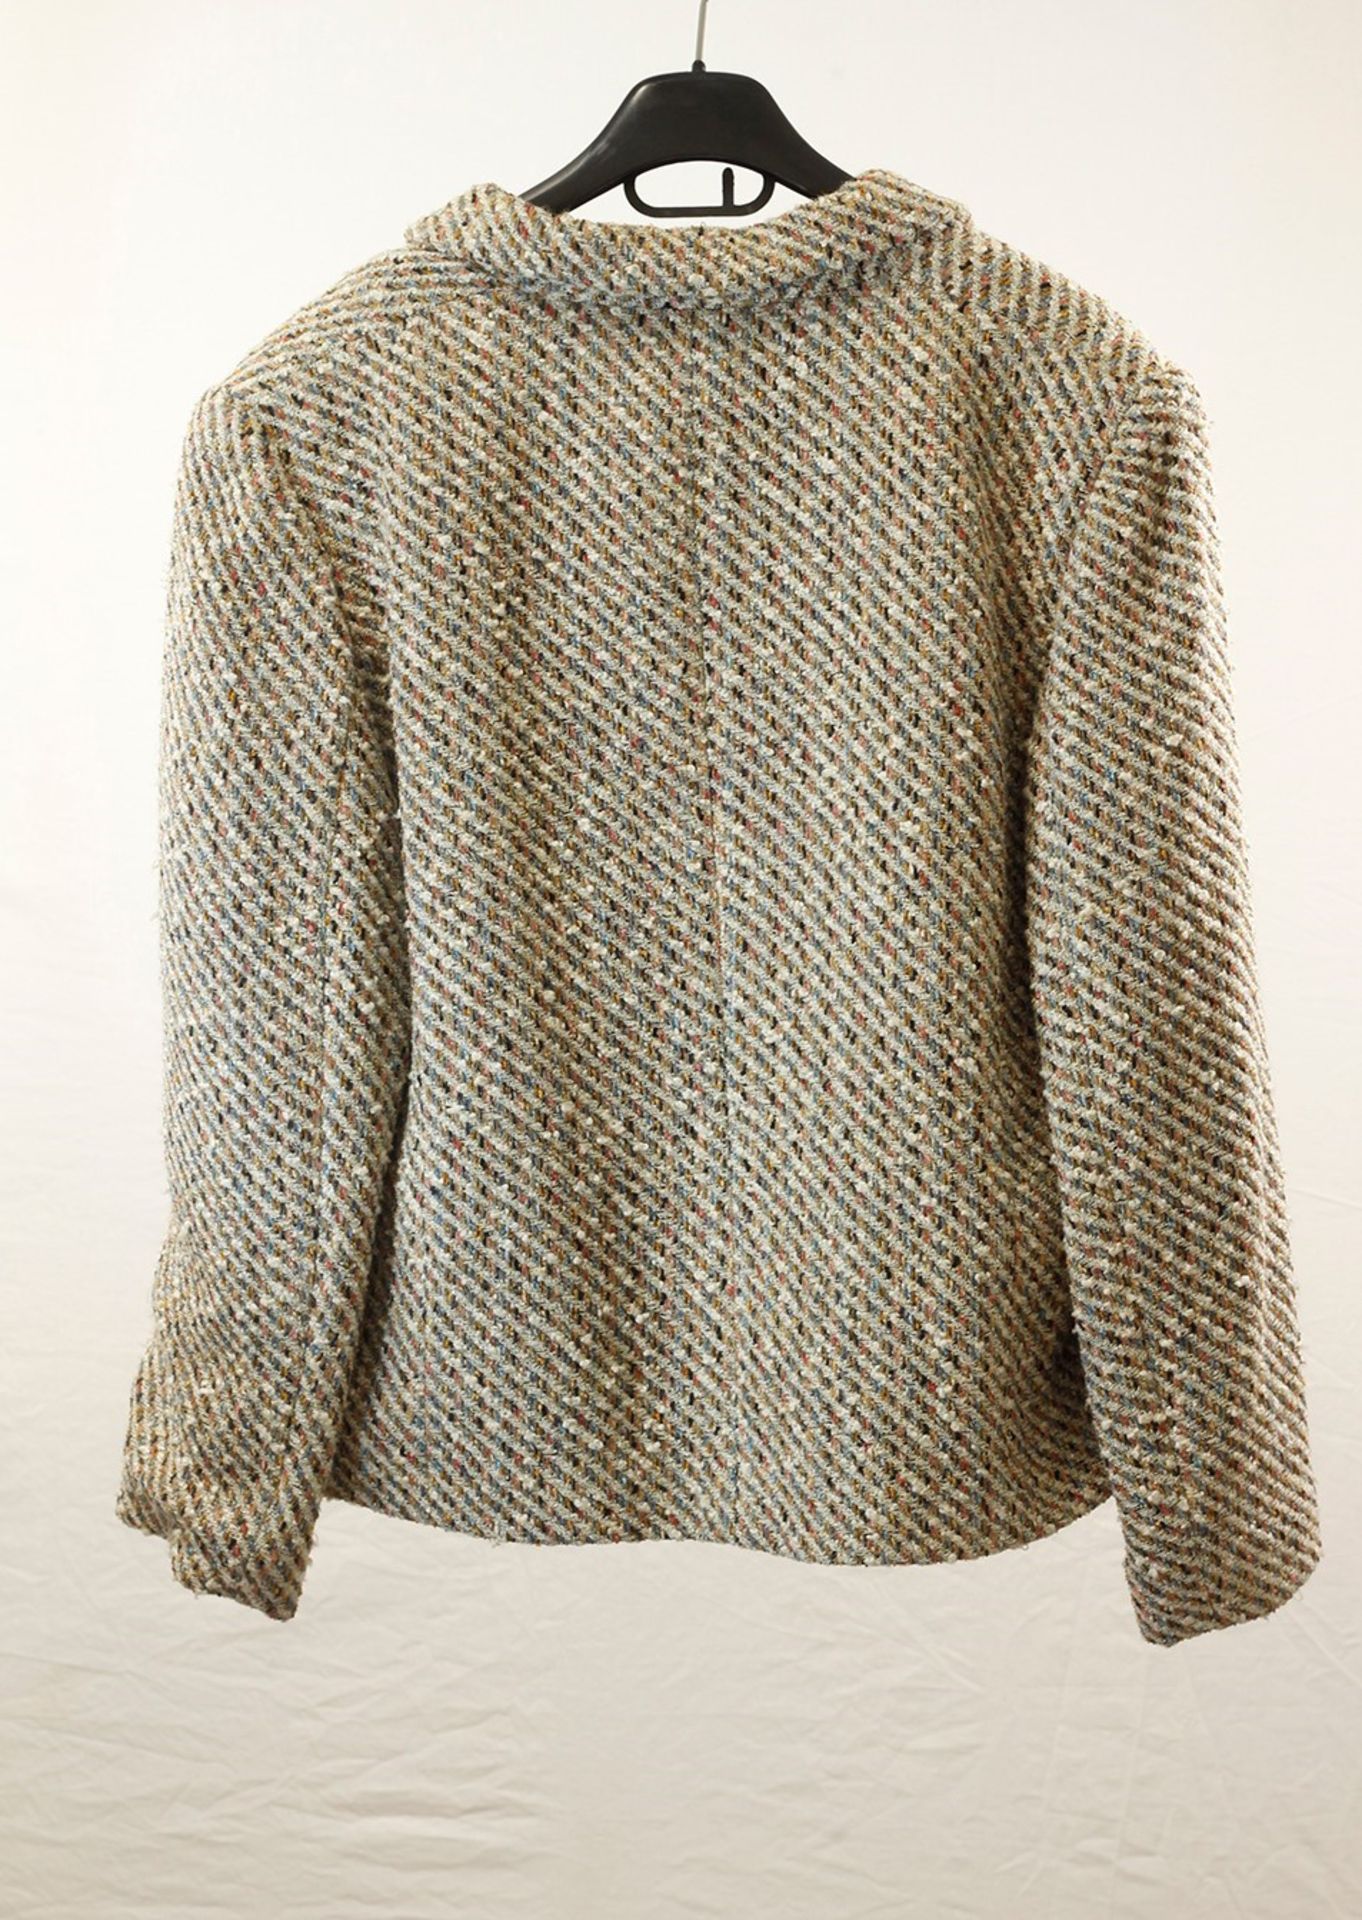 1 x Anne Belin Multicolour Tweed Jacket - Size: 24 - Material: 50% Polyacrylic, 25% Viscose, 25% - Image 2 of 6